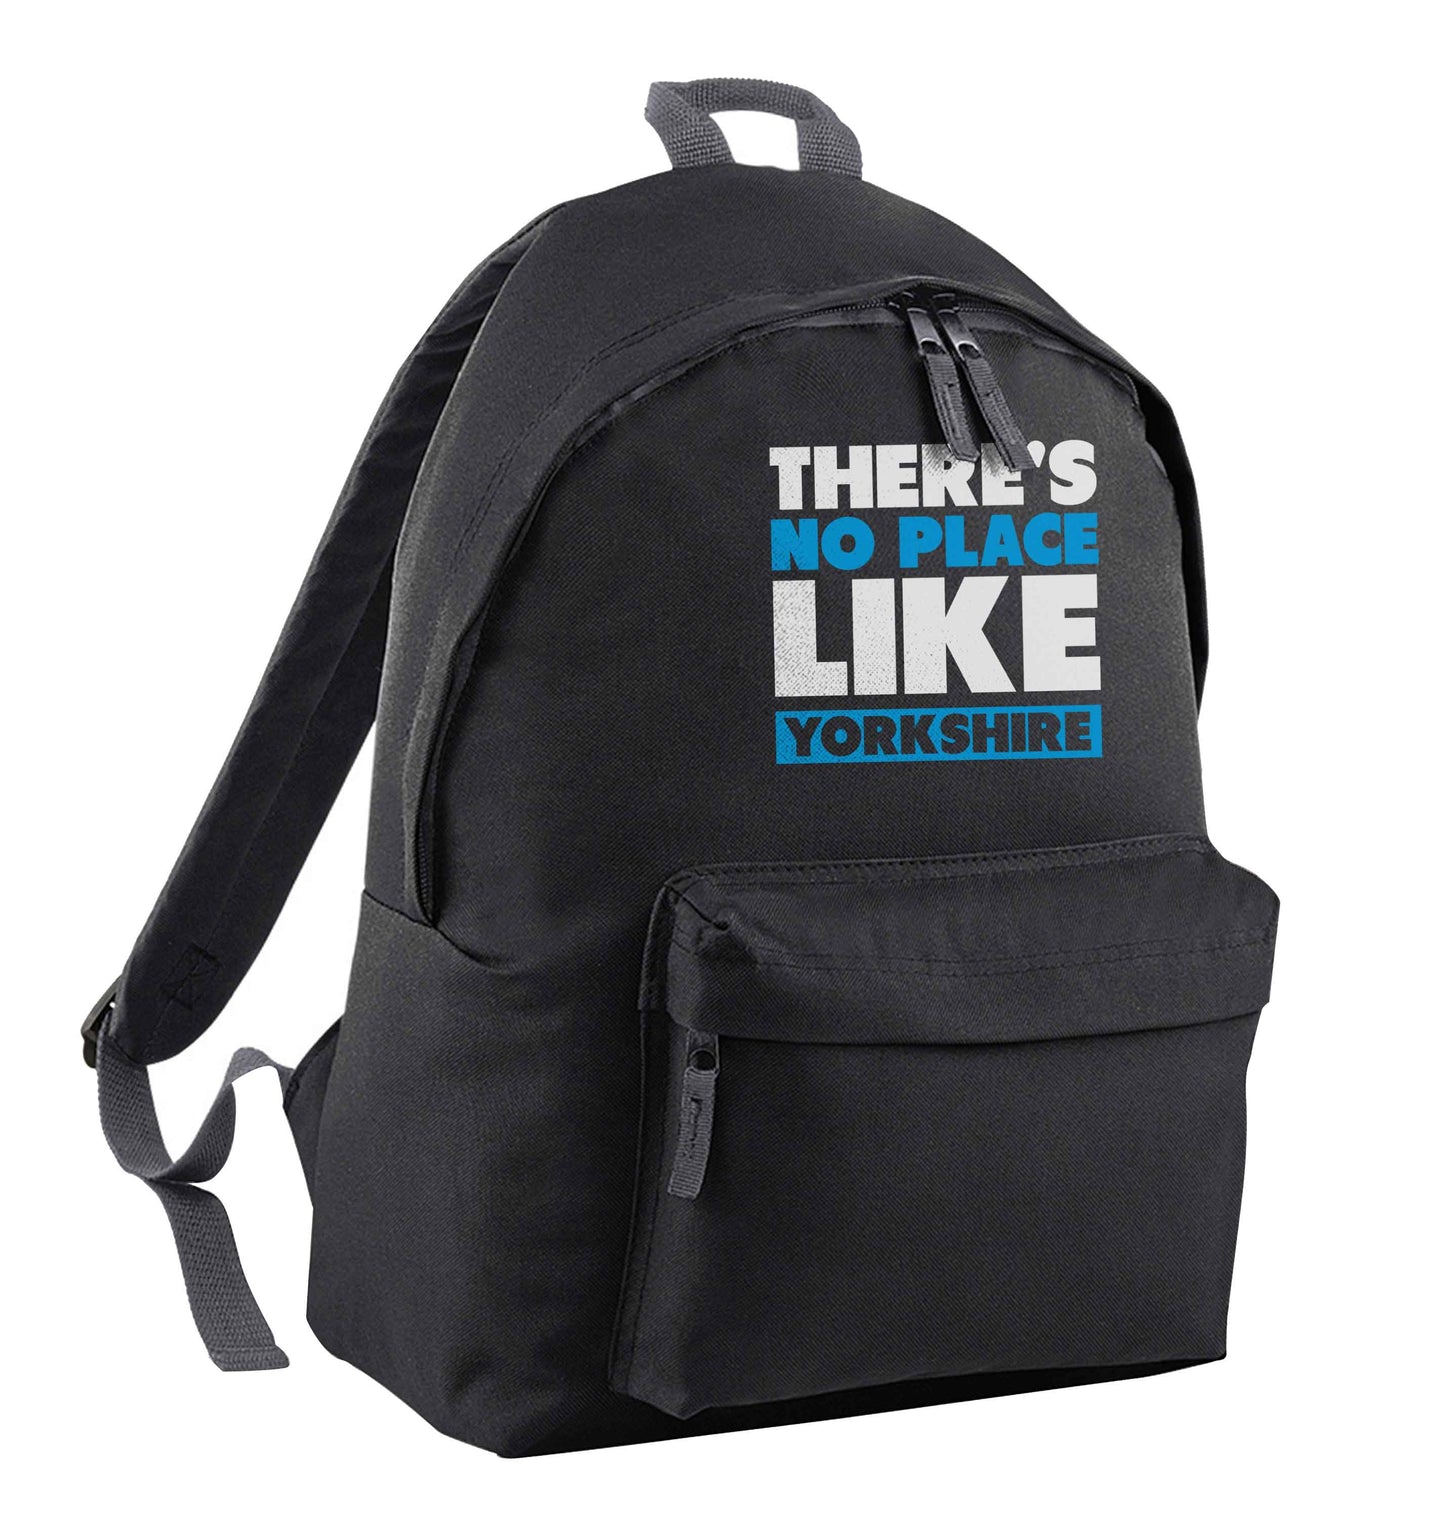 There's no place like Yorkshire black adults backpack